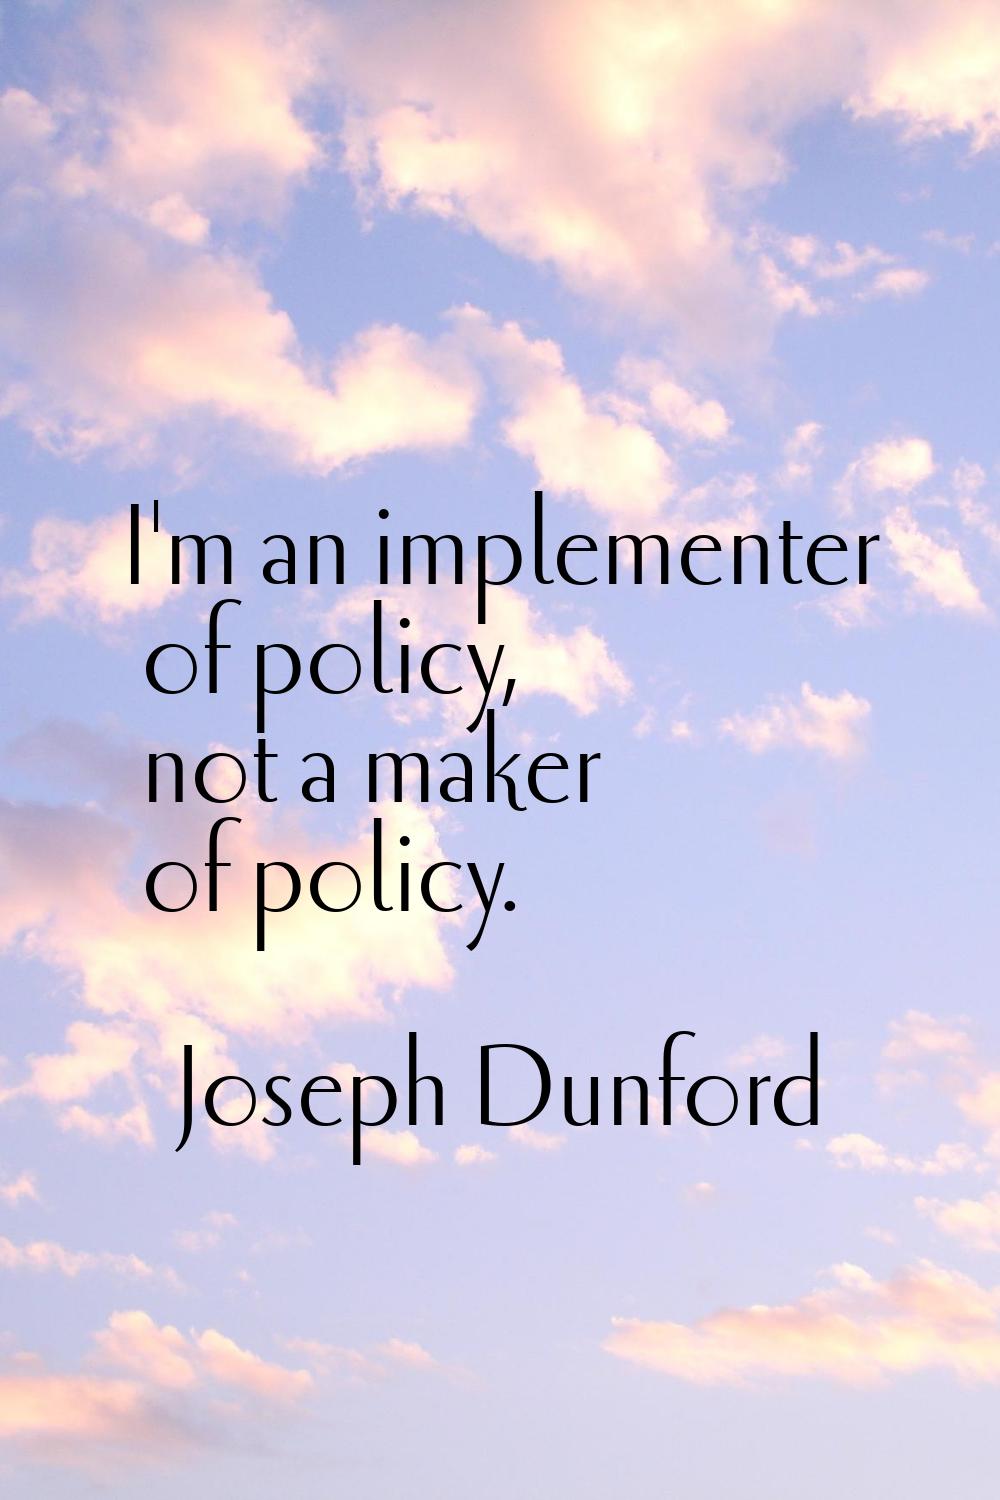 I'm an implementer of policy, not a maker of policy.